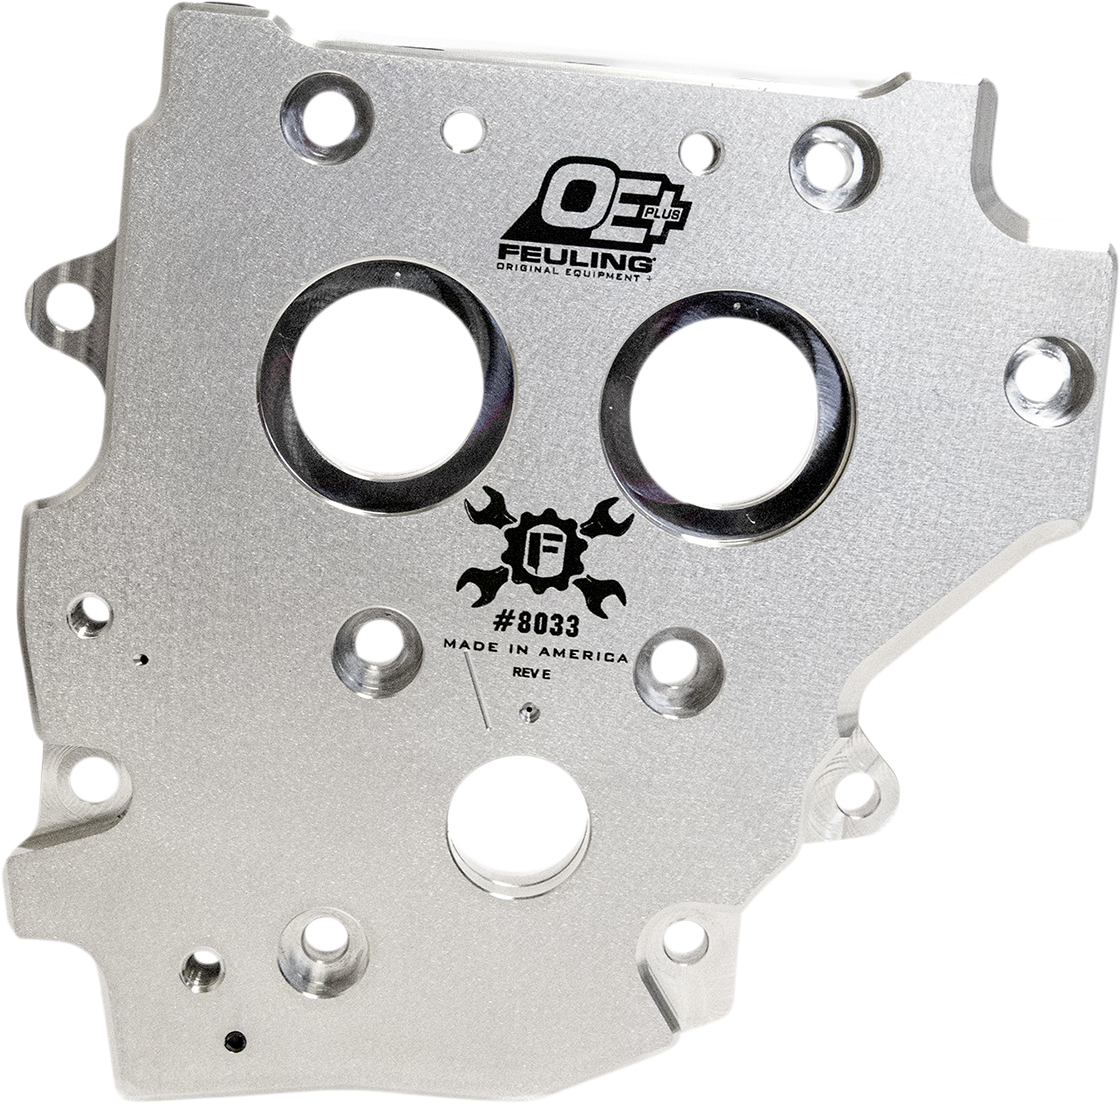 Feuling OE+ Motorcycle Cam Plate 2006-2017 Harley Dyna Softail Touring Models